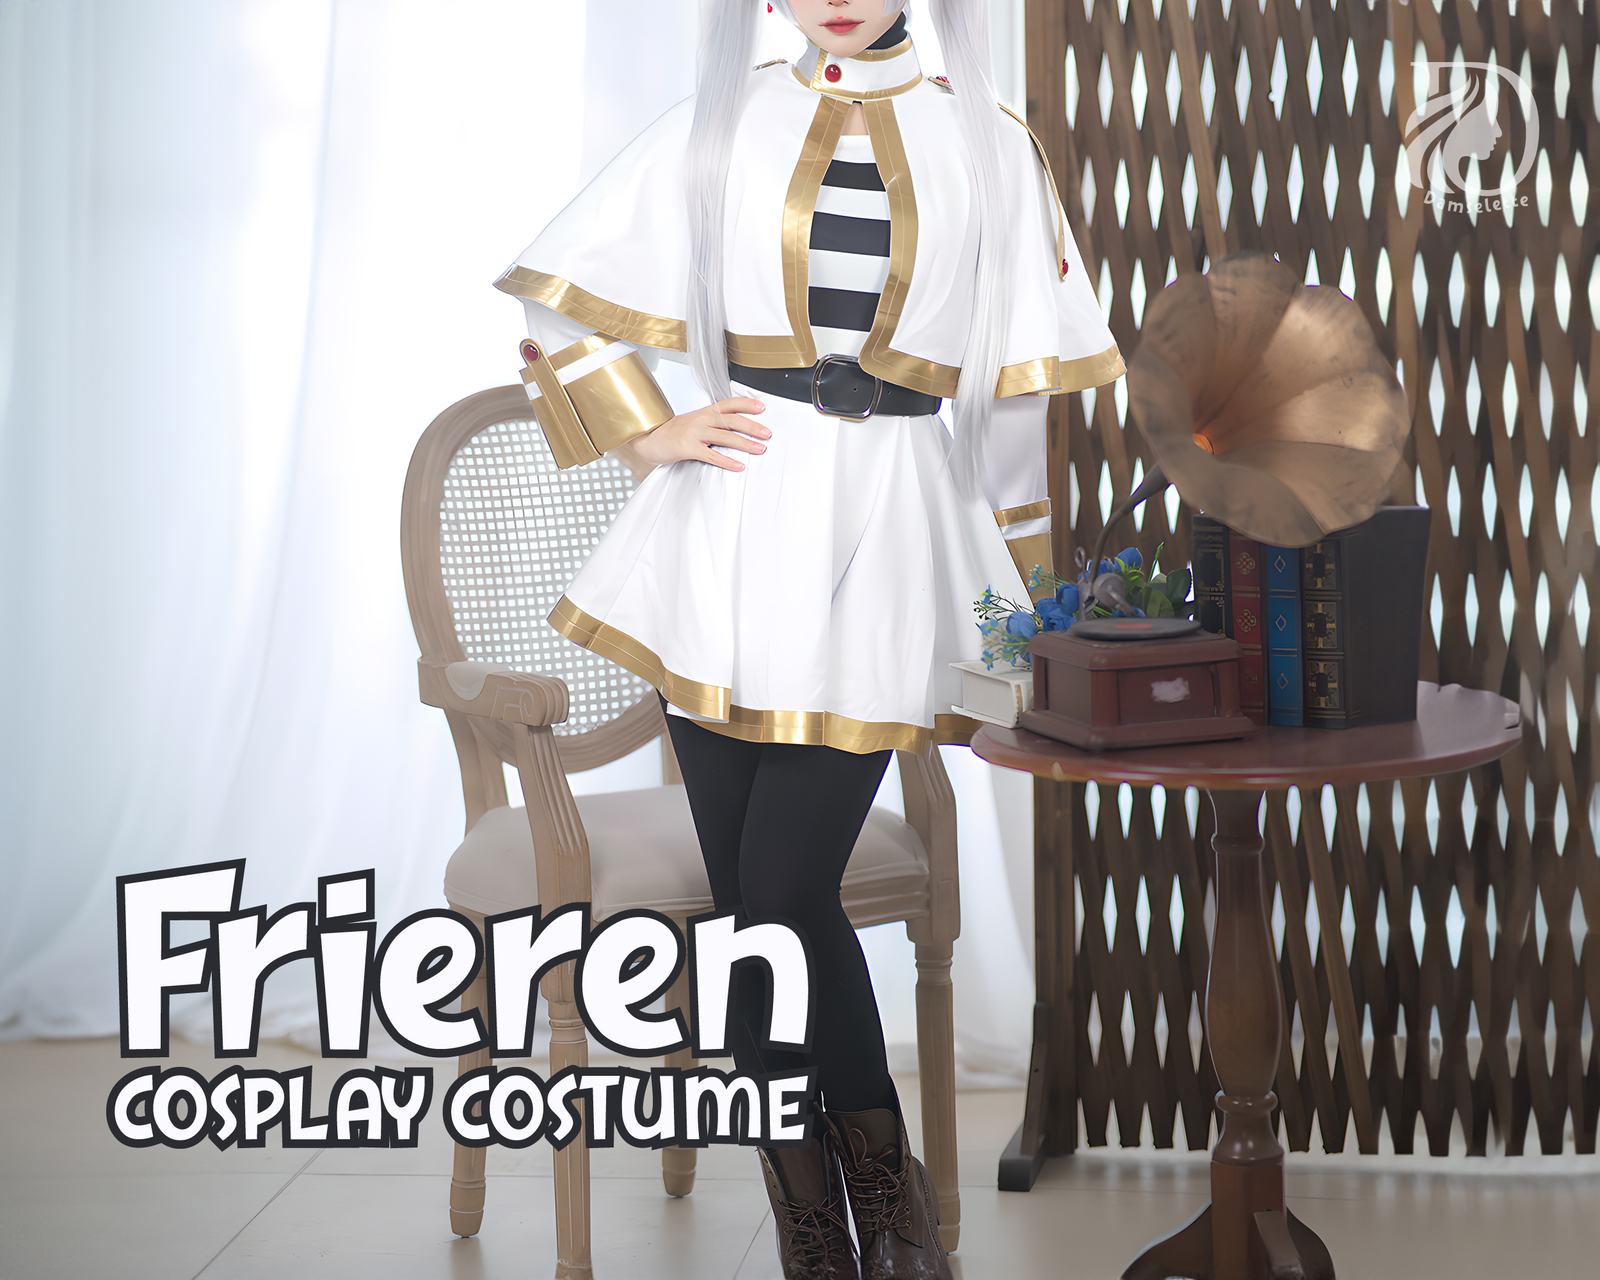 Primary image for Frieren Cosplay Costume,Customized Cosplay Costume, Comic Con, Halloween